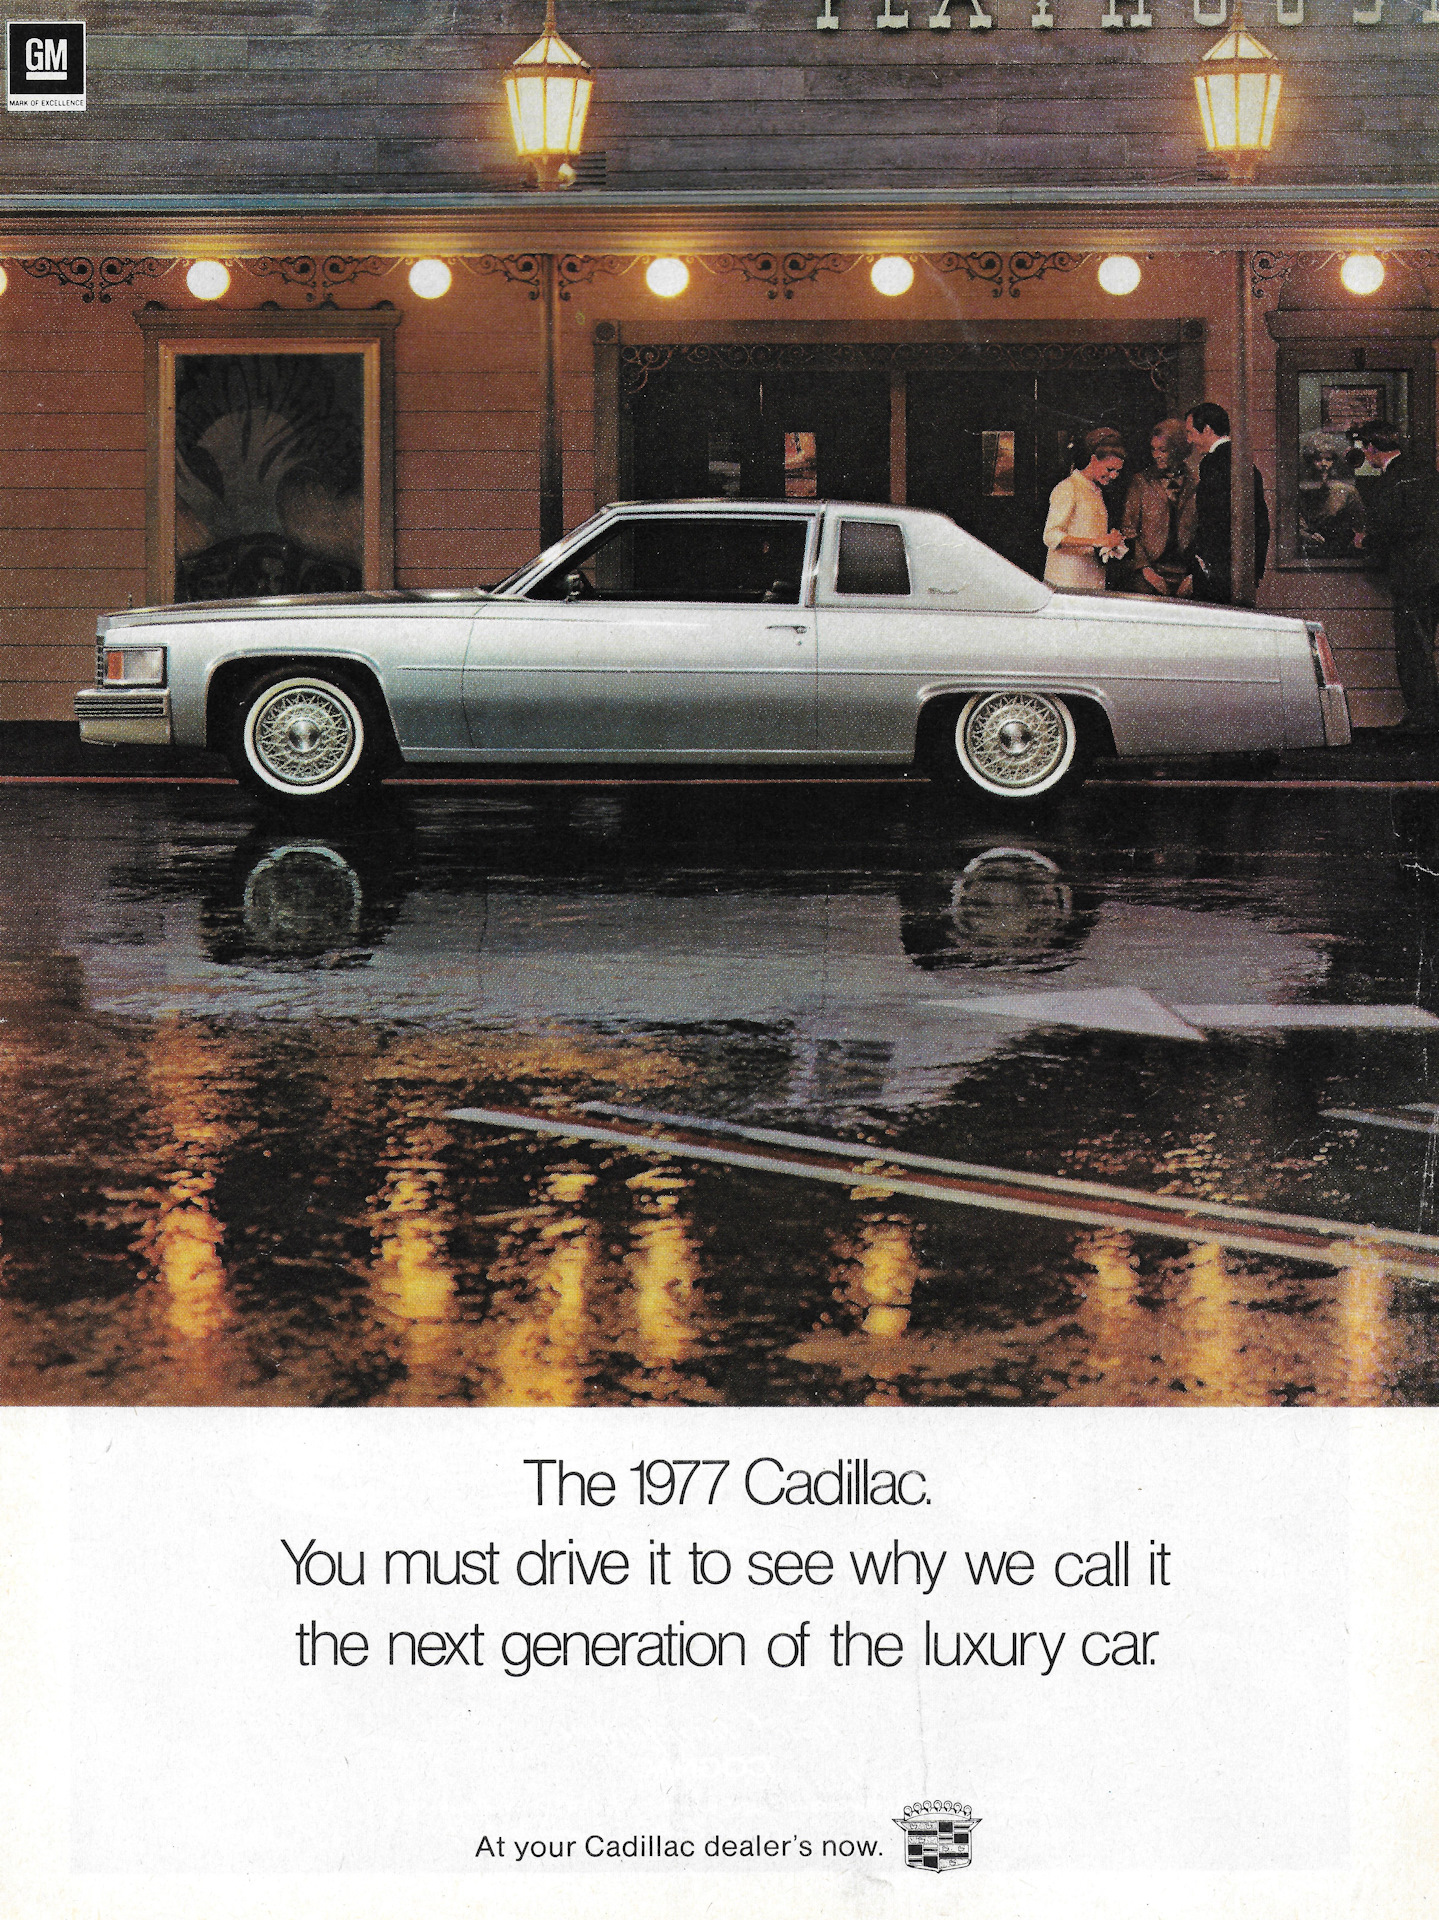 You must to drive. Cadillac 1977.